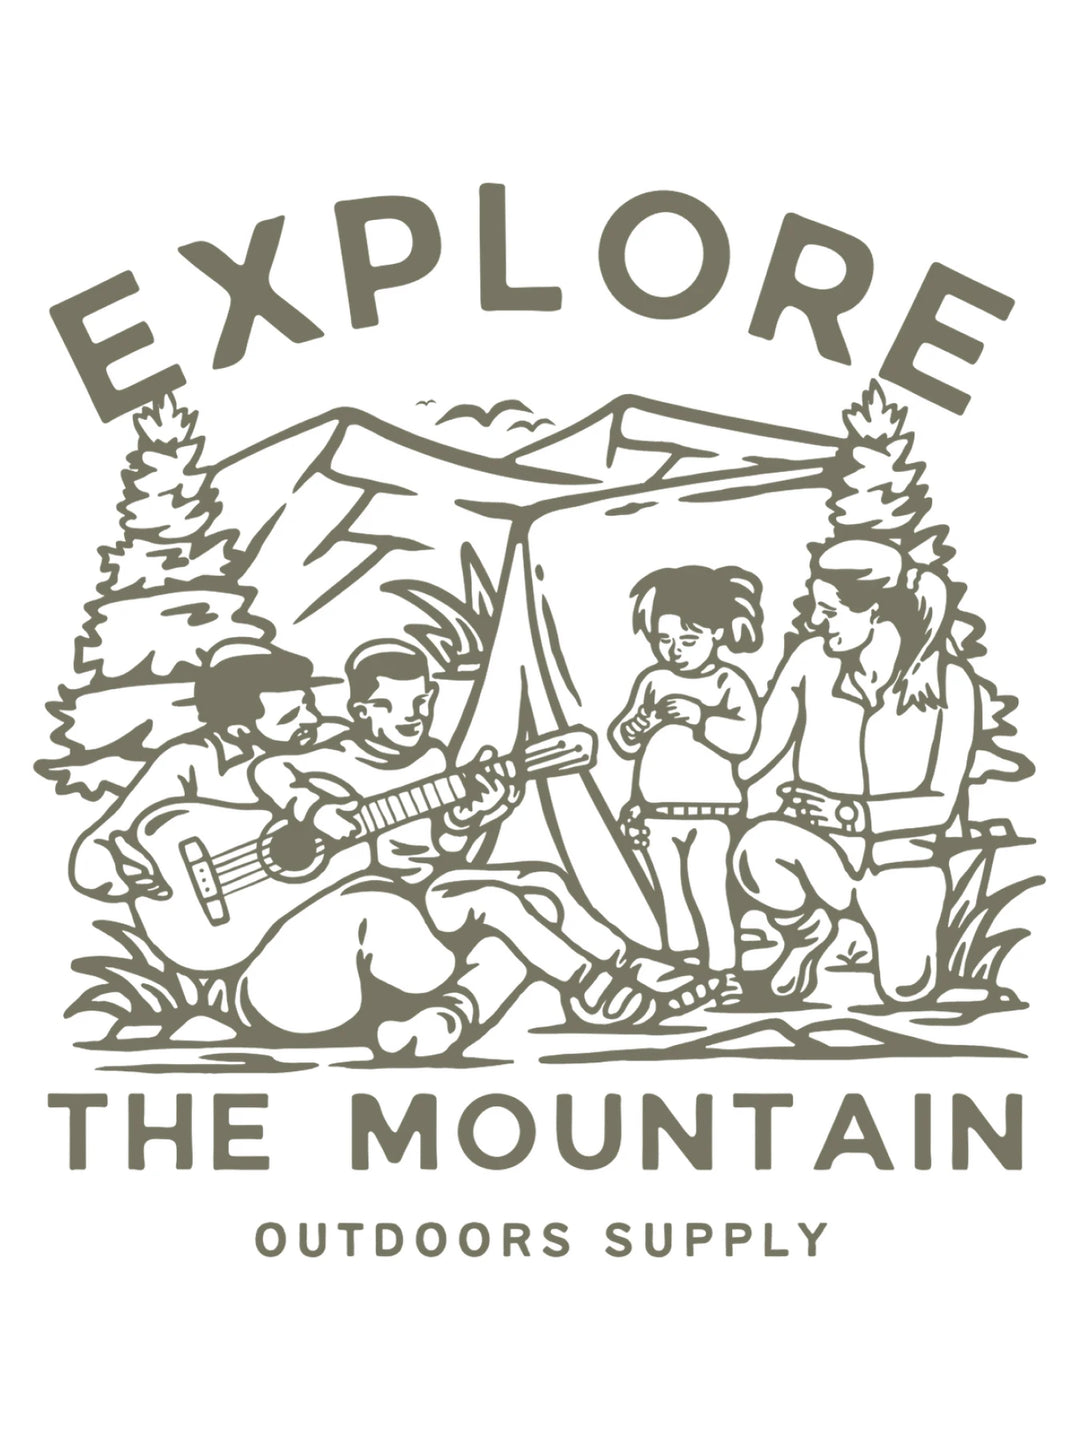 Explore The Mountain Outdoors Supply - Unisex T-Shirt